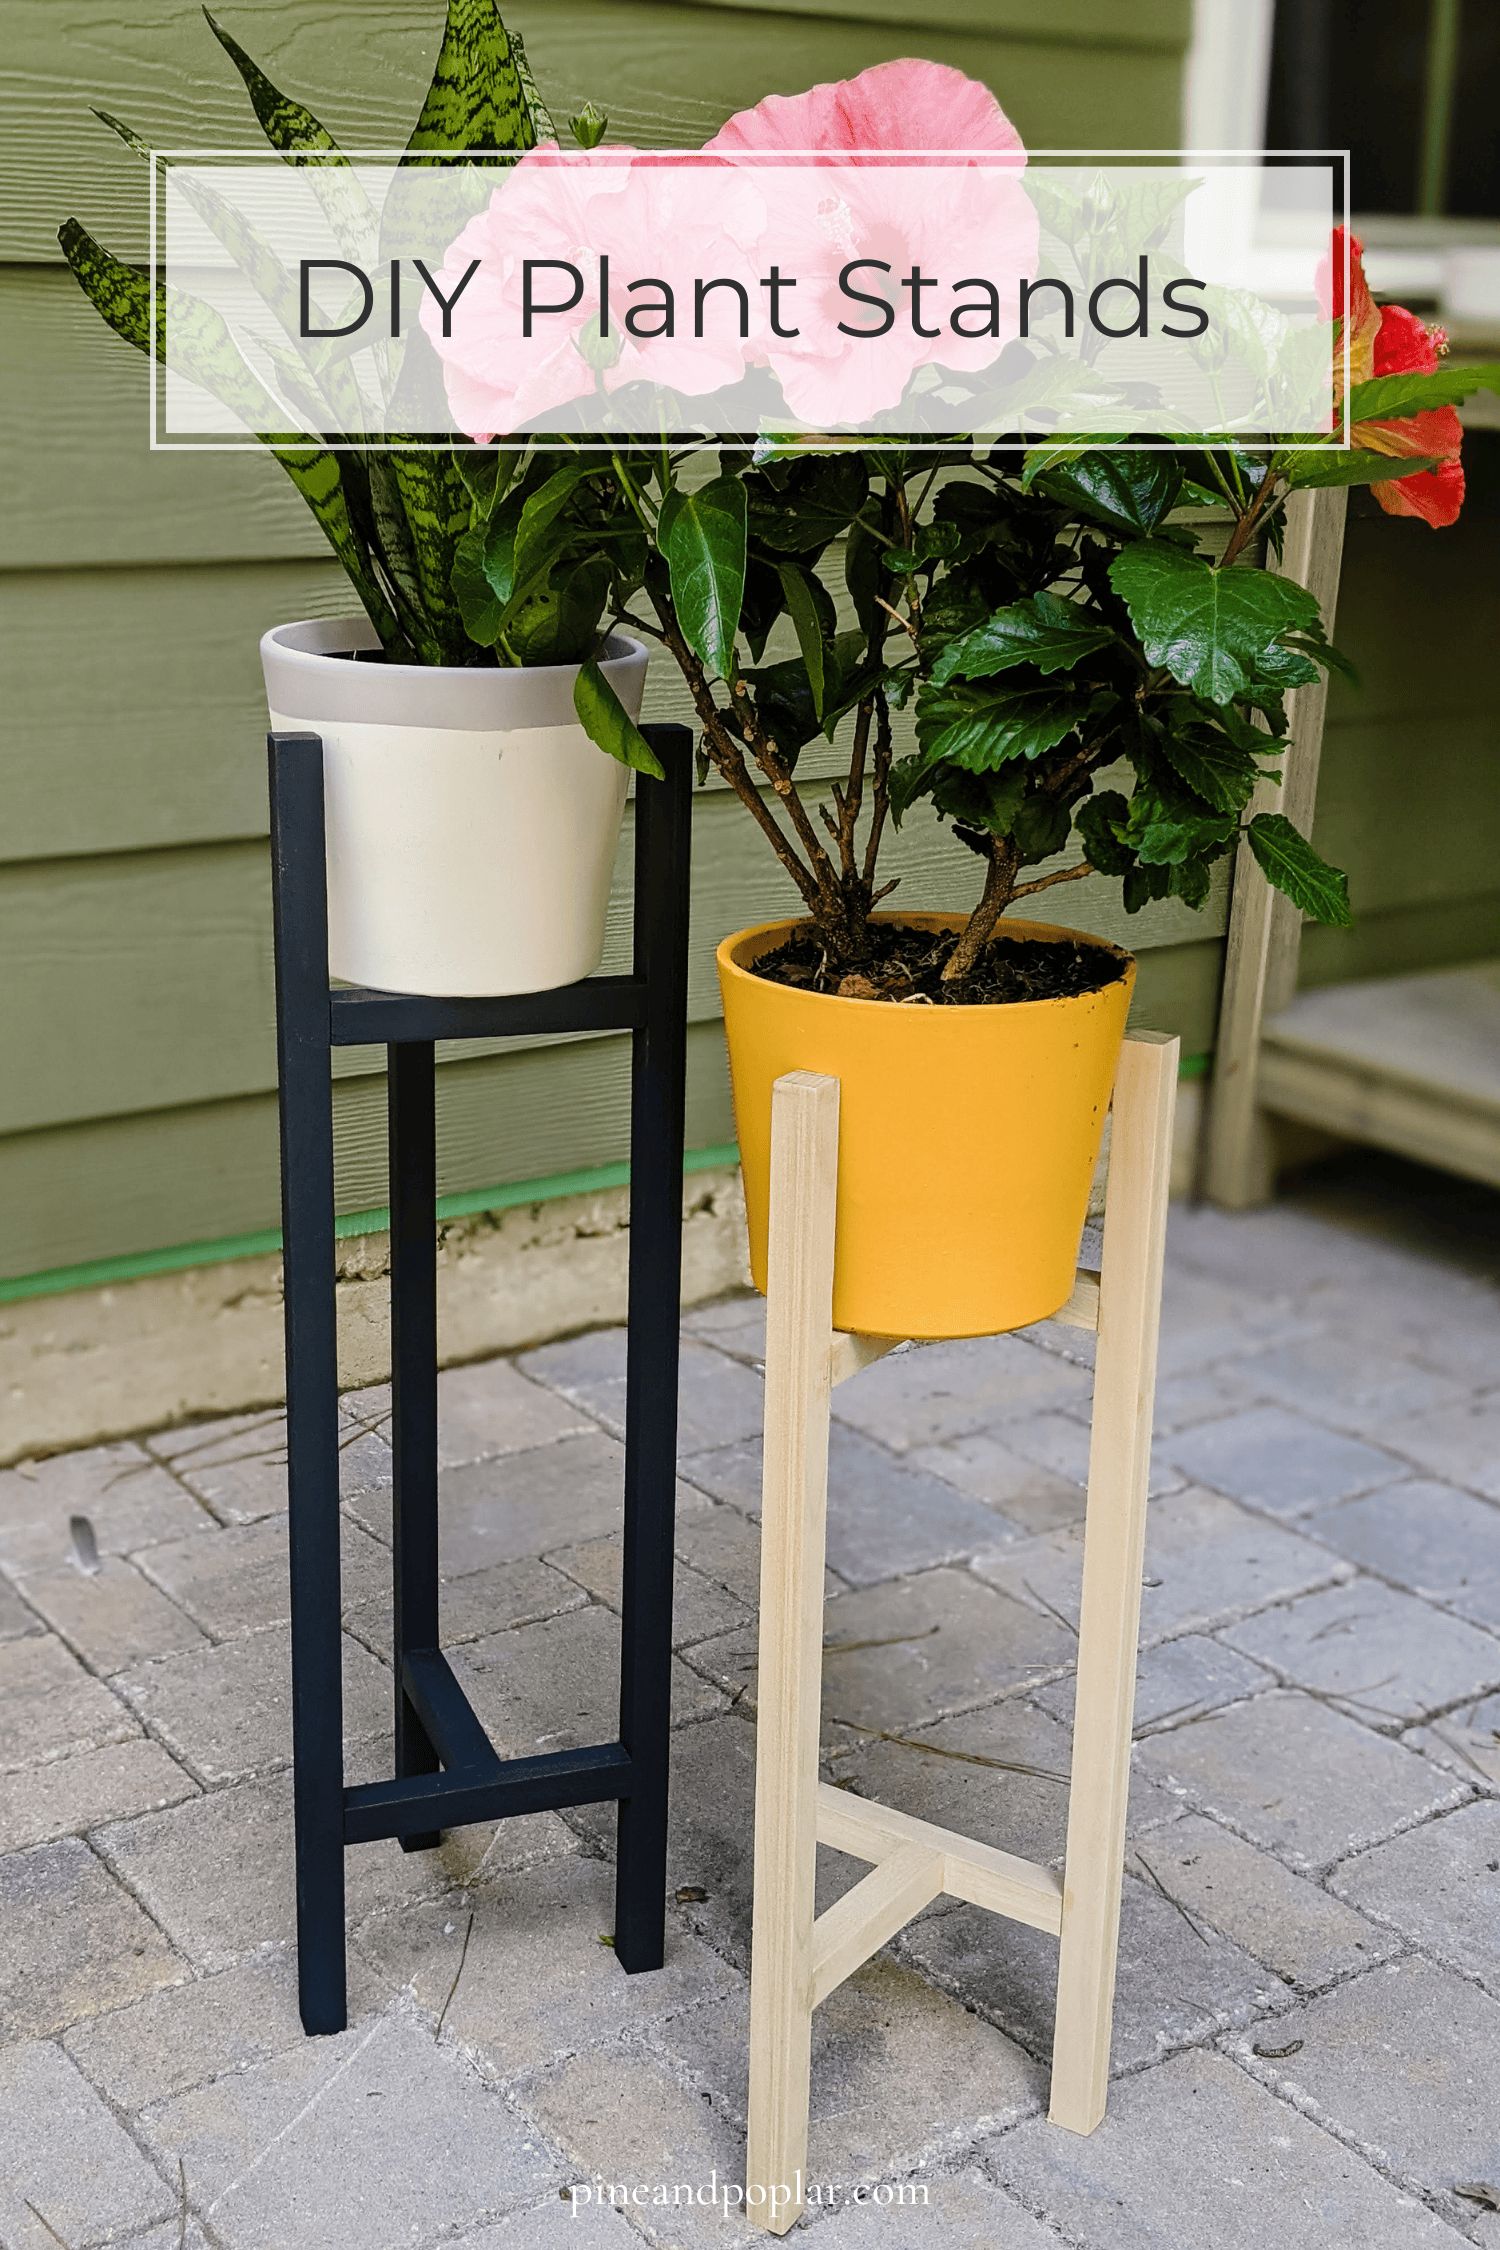 The Easiest Diy Plant Stand Plans Pertaining To Deluxe Plant Stands (View 10 of 15)